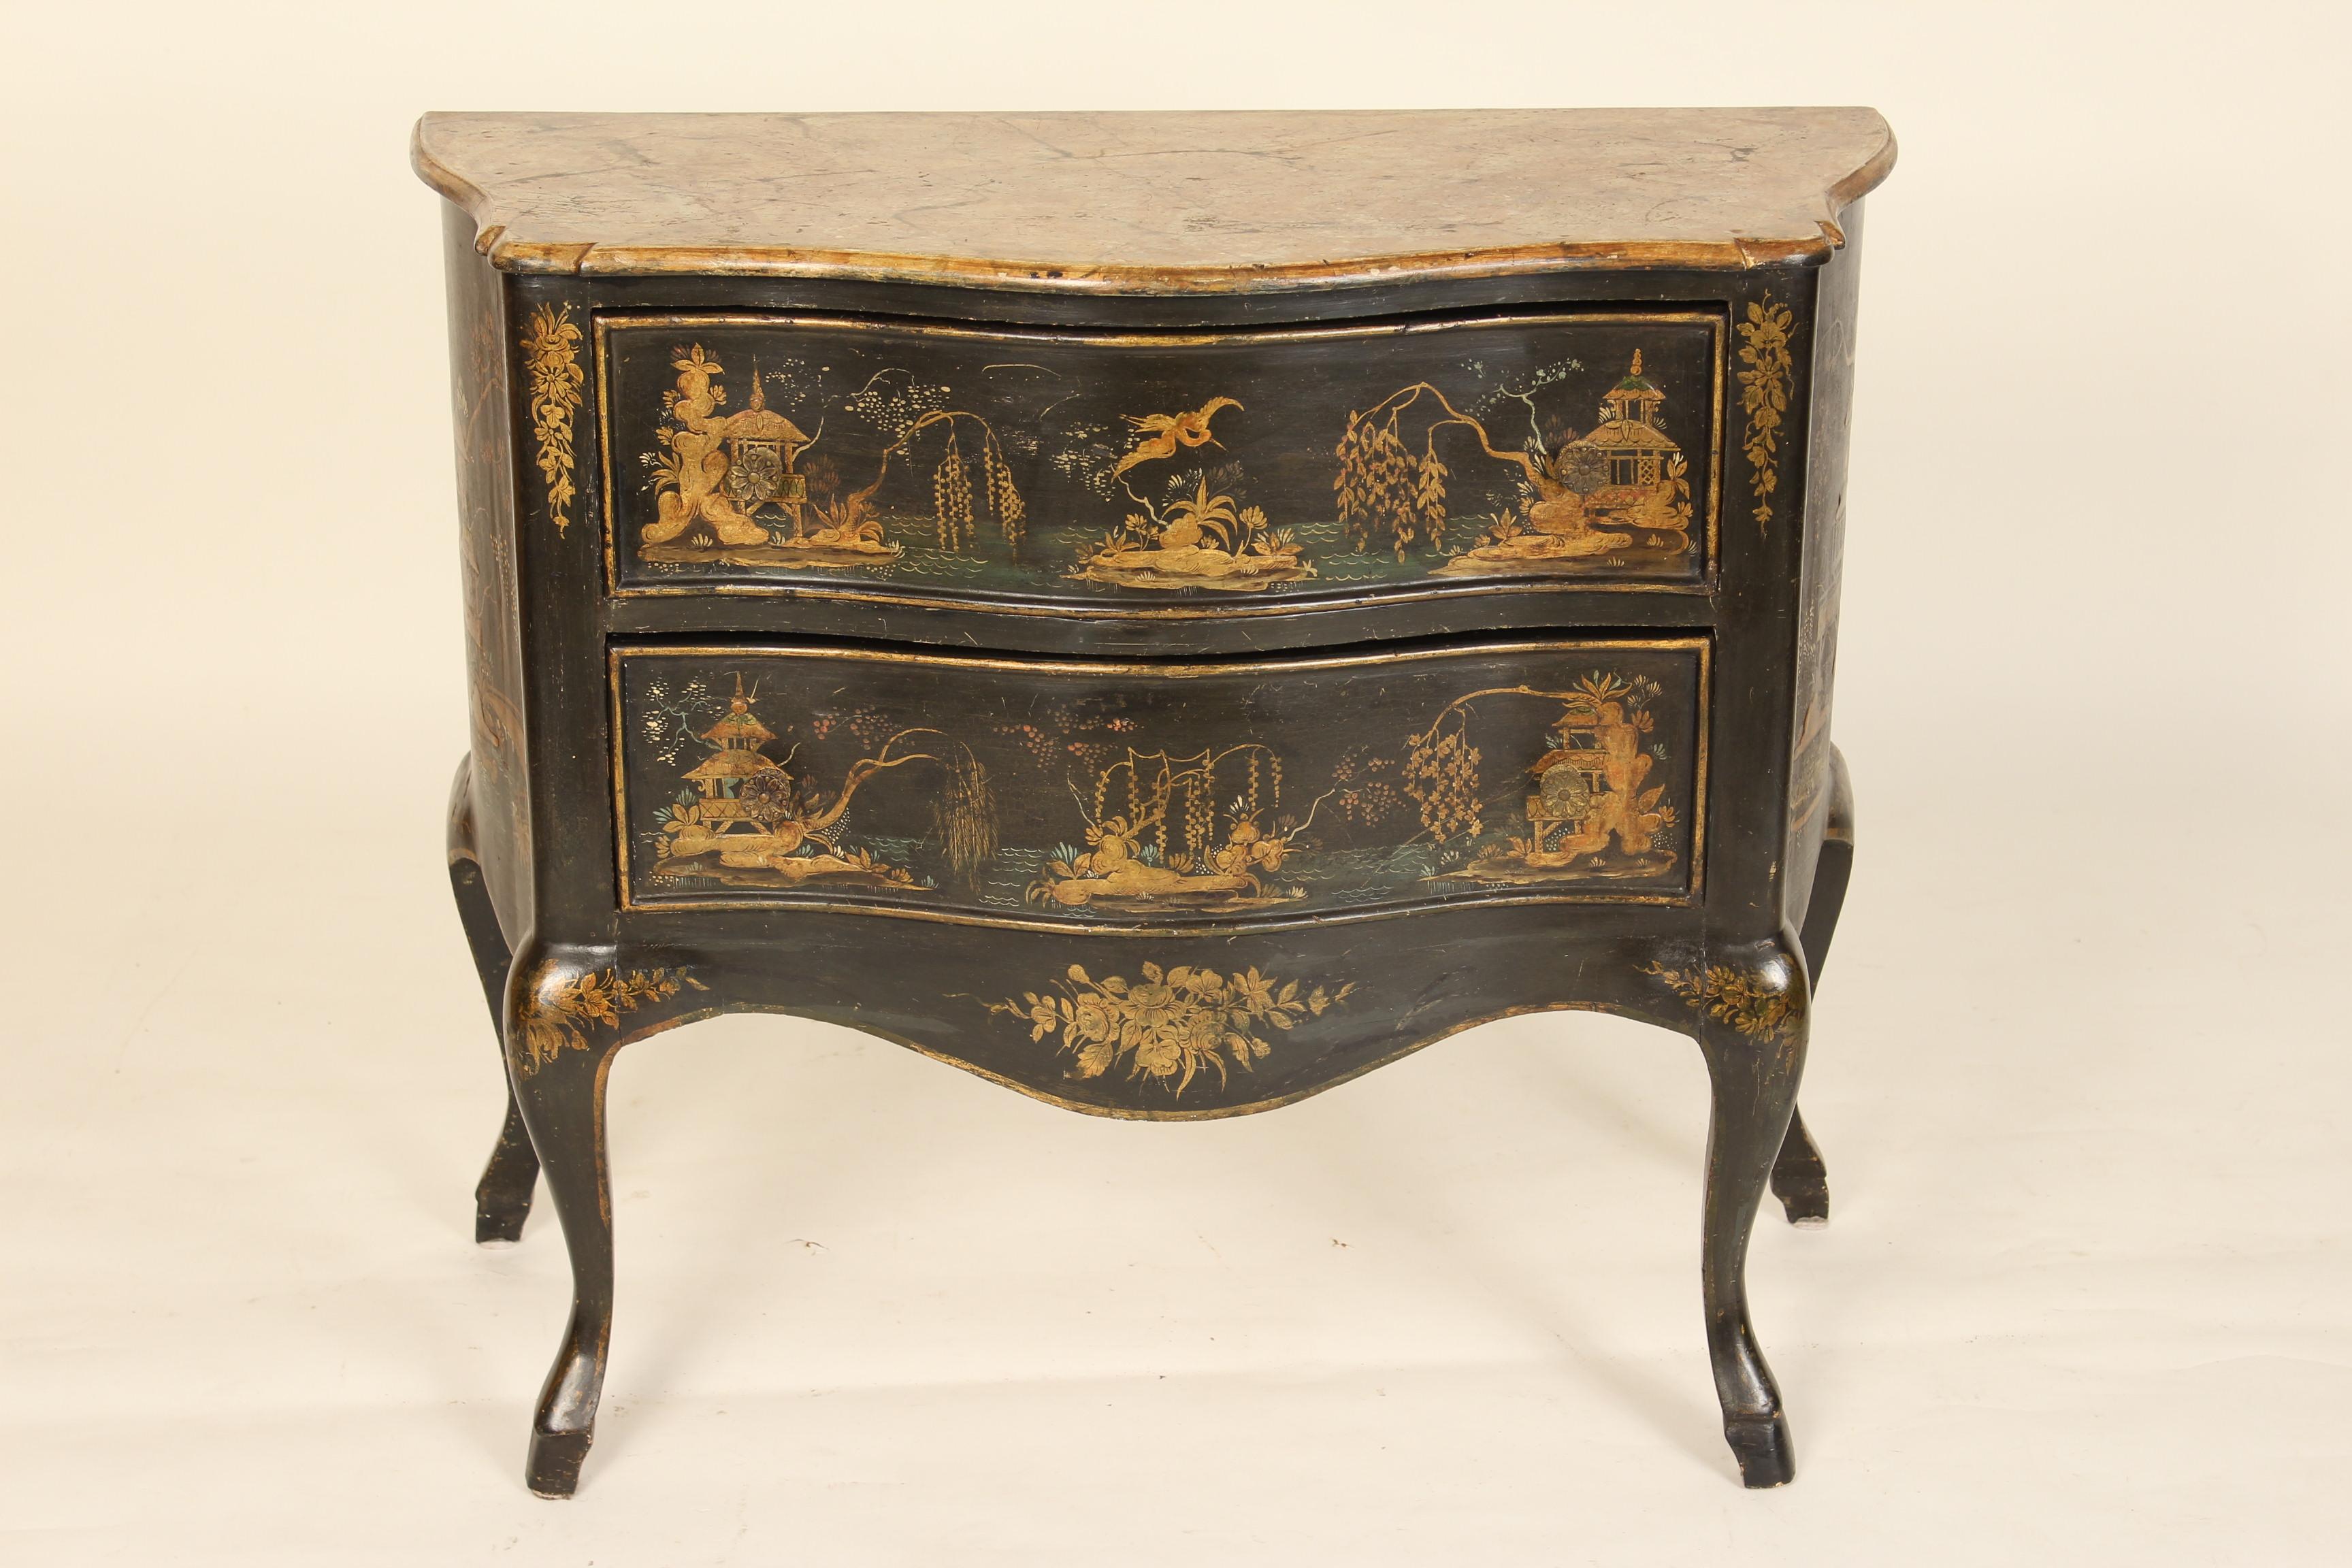 Italian Louis XV style chinoiserie decorated two drawer chest of drawers with a faux marble top, mid-20th century.